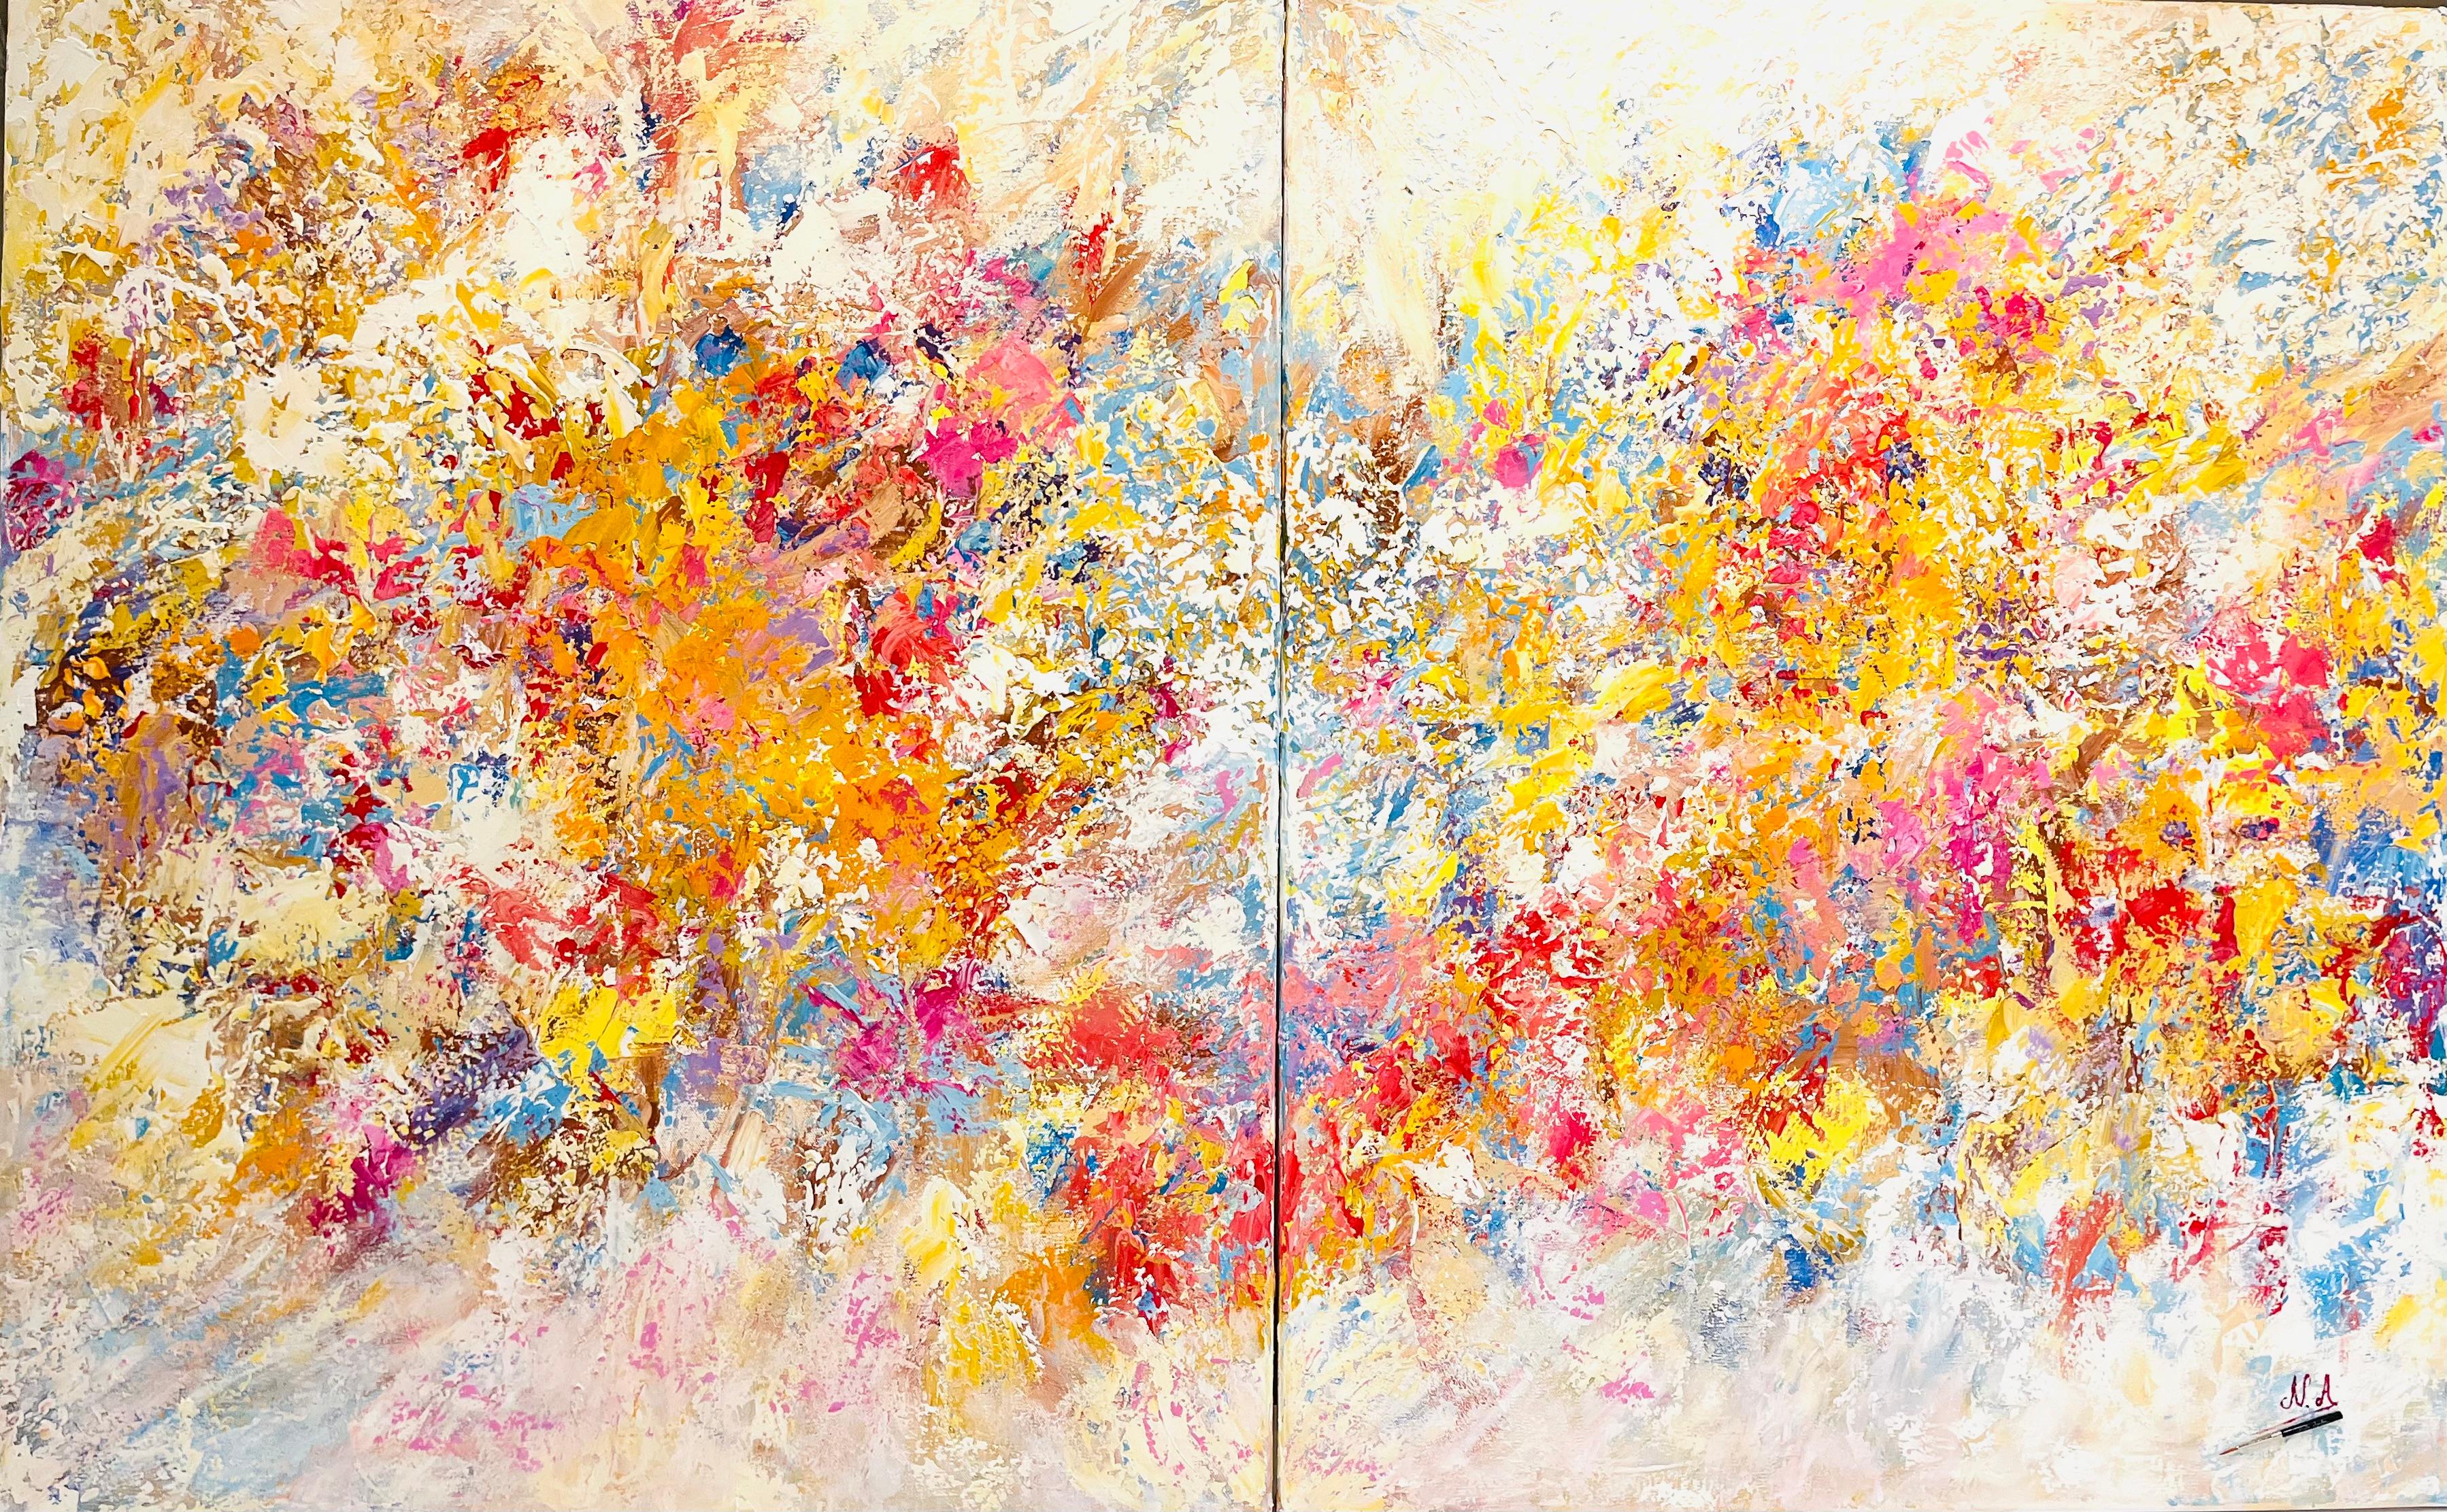 Acrylic on canvas with knife
Diptych can be sold separately, each = $1,200 (92 x 72 x 4 cm - 36,2 x 28,3 x 1,6 in)
Unique work signed lower right with a personalized brush

Nicole Azoulay is a French female artist born in 1963 who lives and works in